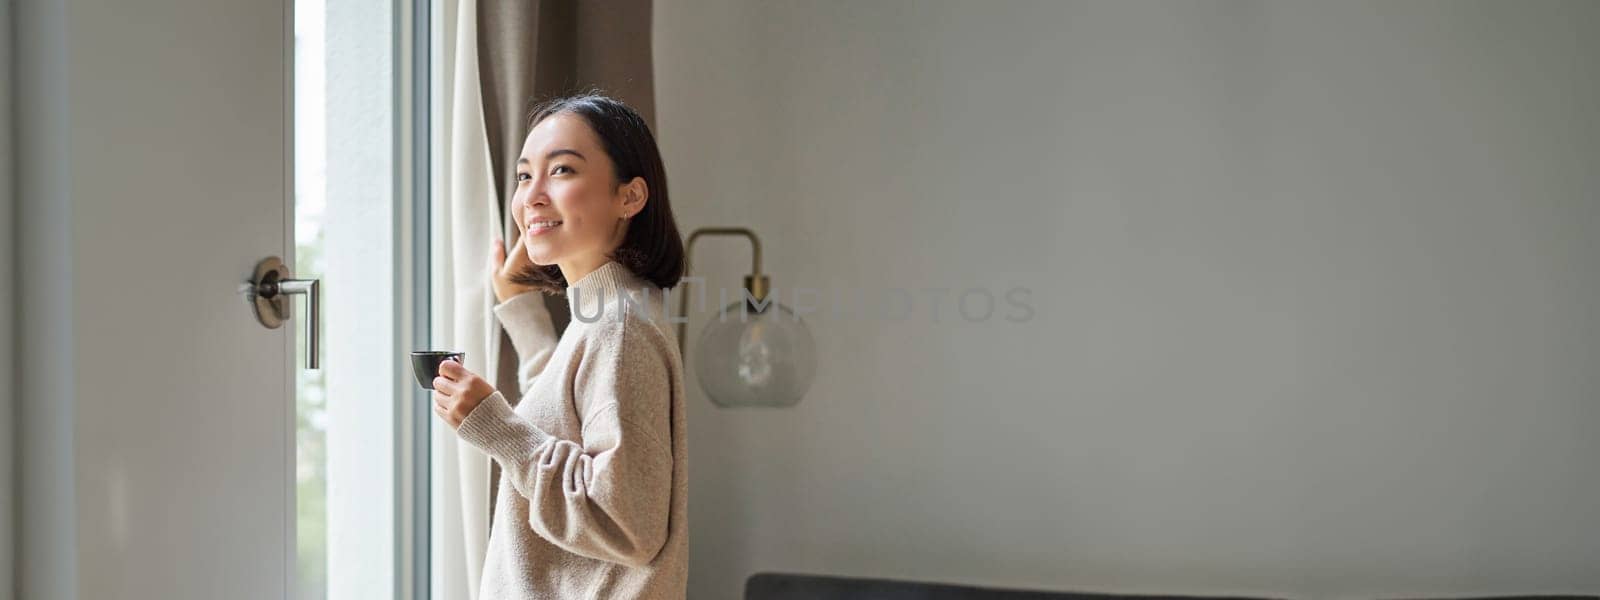 Beautiful korean woman staying at home, looking outside window, drinking coffee espresso and smiling, feeling comfort and warmth.